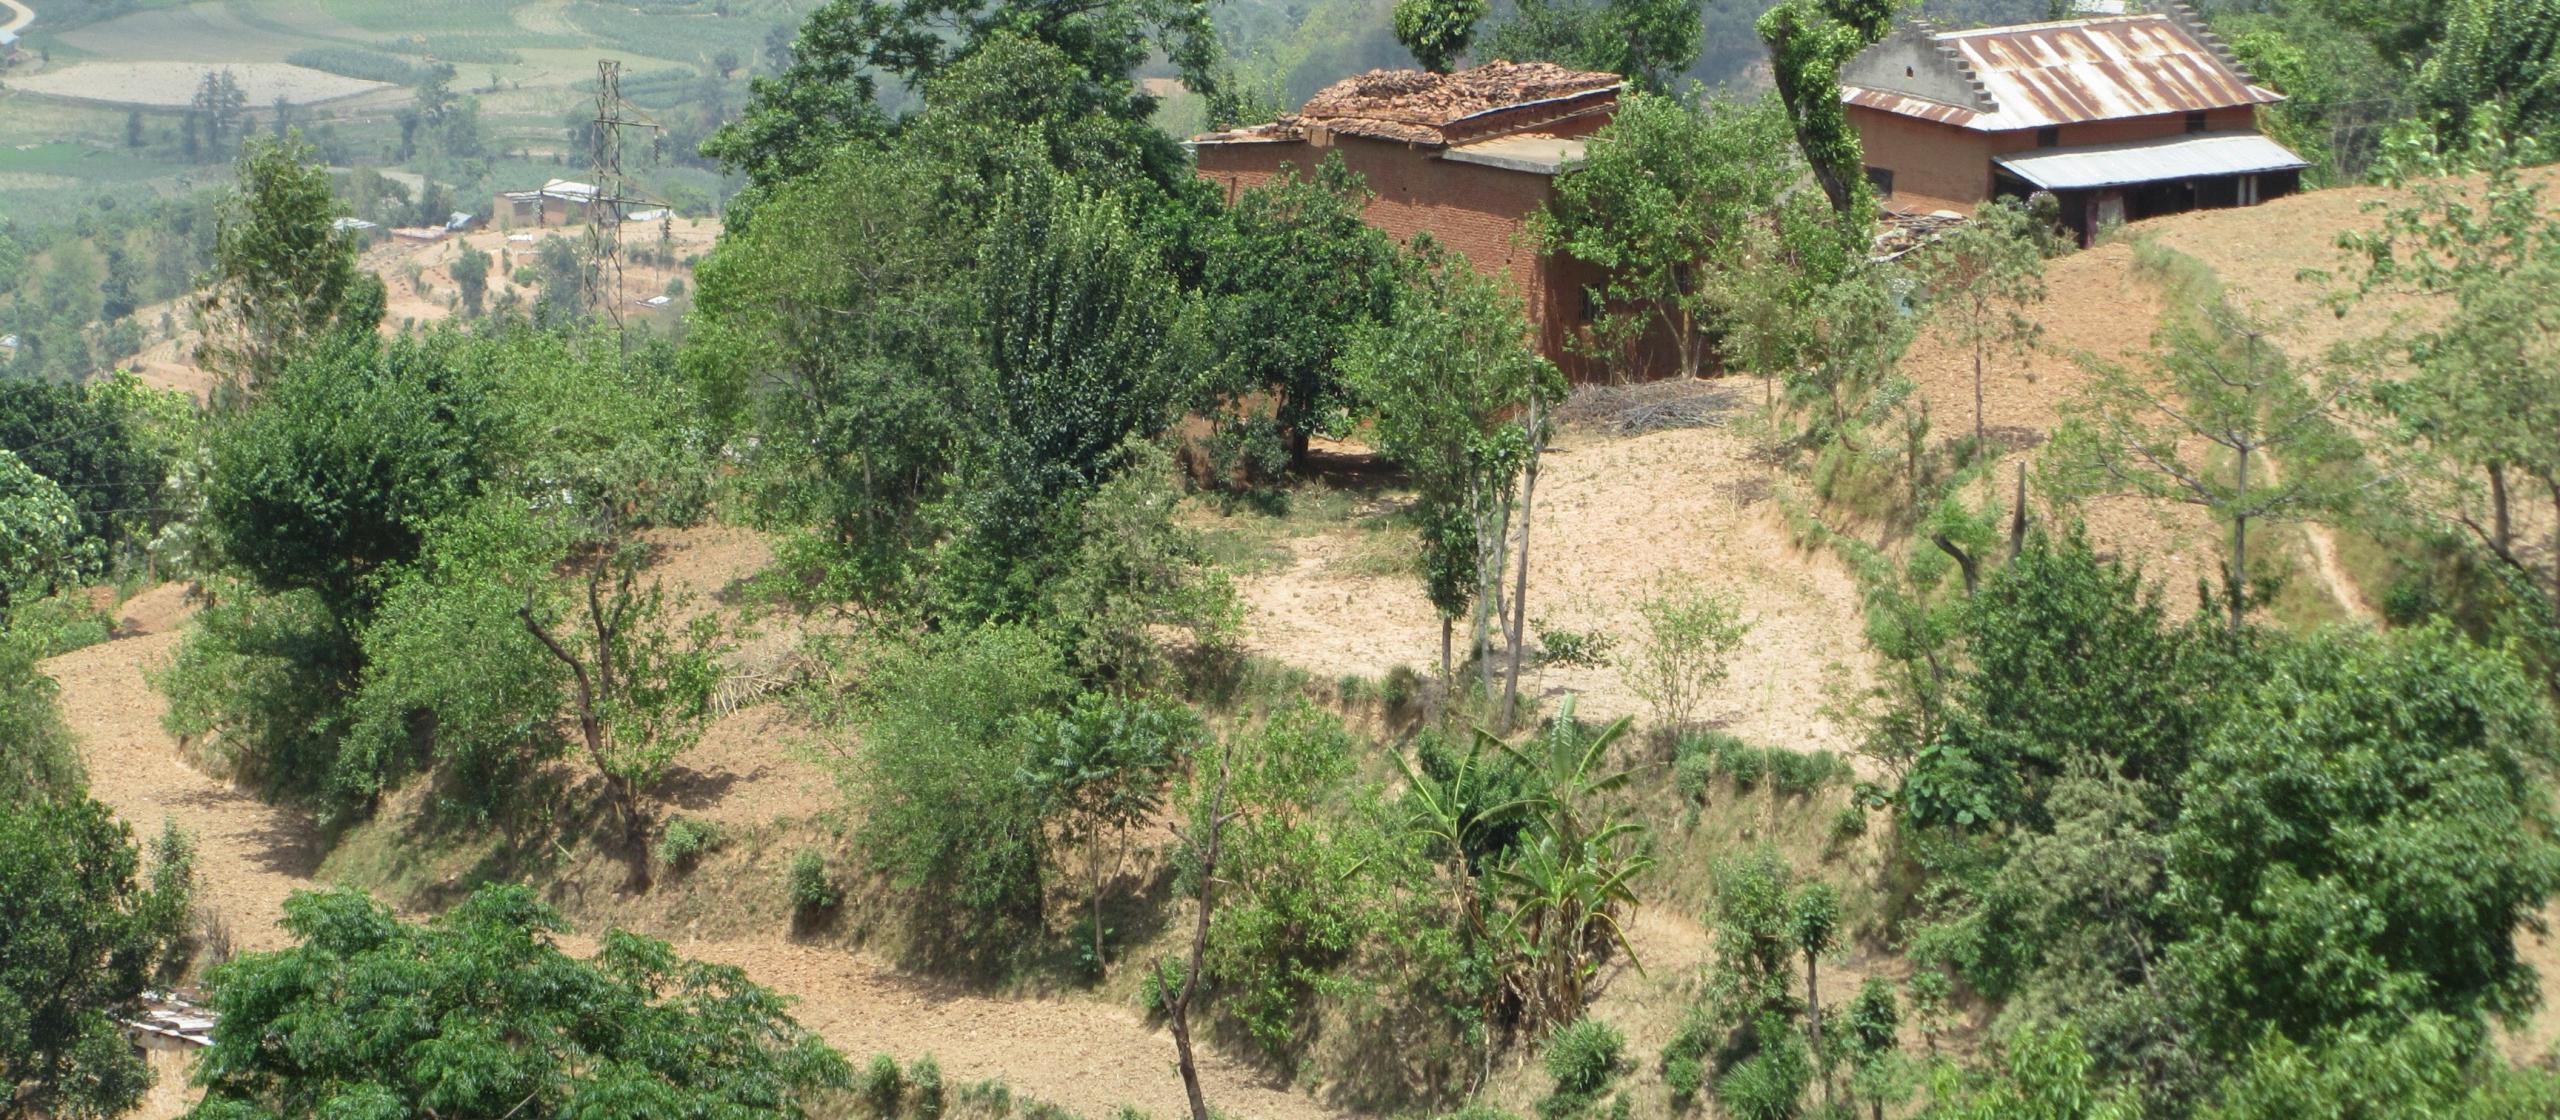 A valley in Nepal with houses